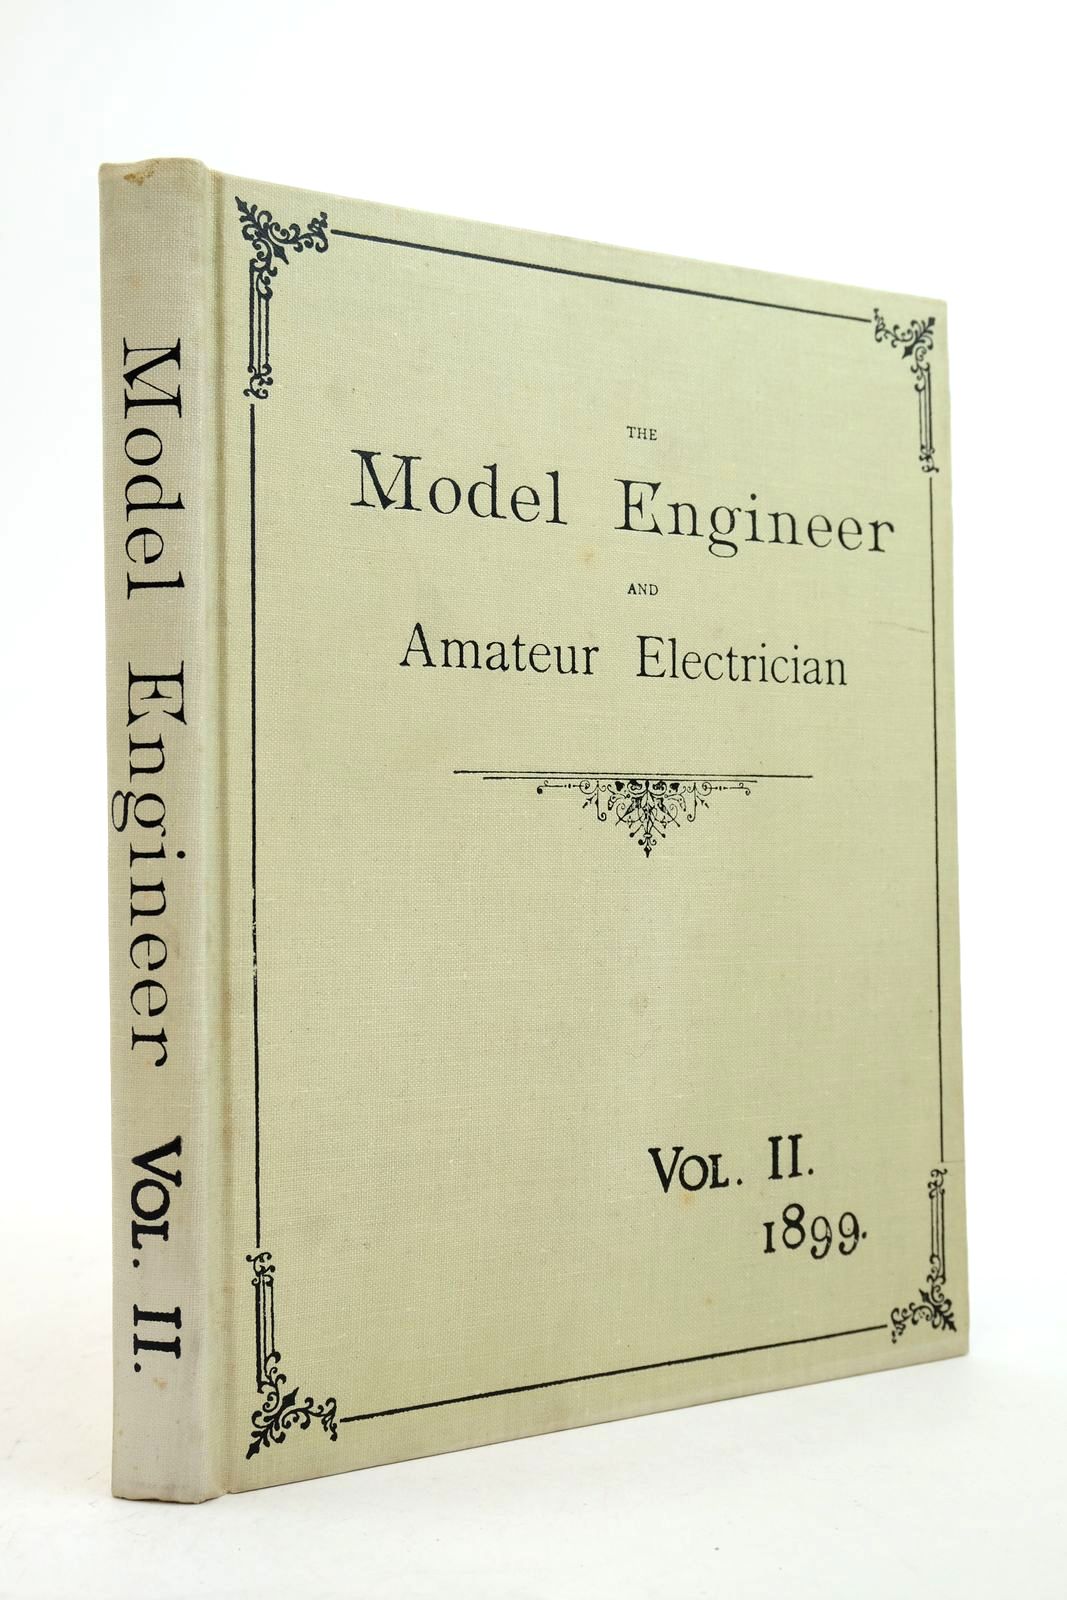 Photo of THE MODEL ENGINEER AND AMATEUR ELECTRICIAN VOL. II - 1899 written by Marshall, Percival published by Dawbarn &amp; Ward Limited, Argus Books Ltd (STOCK CODE: 2139856)  for sale by Stella & Rose's Books